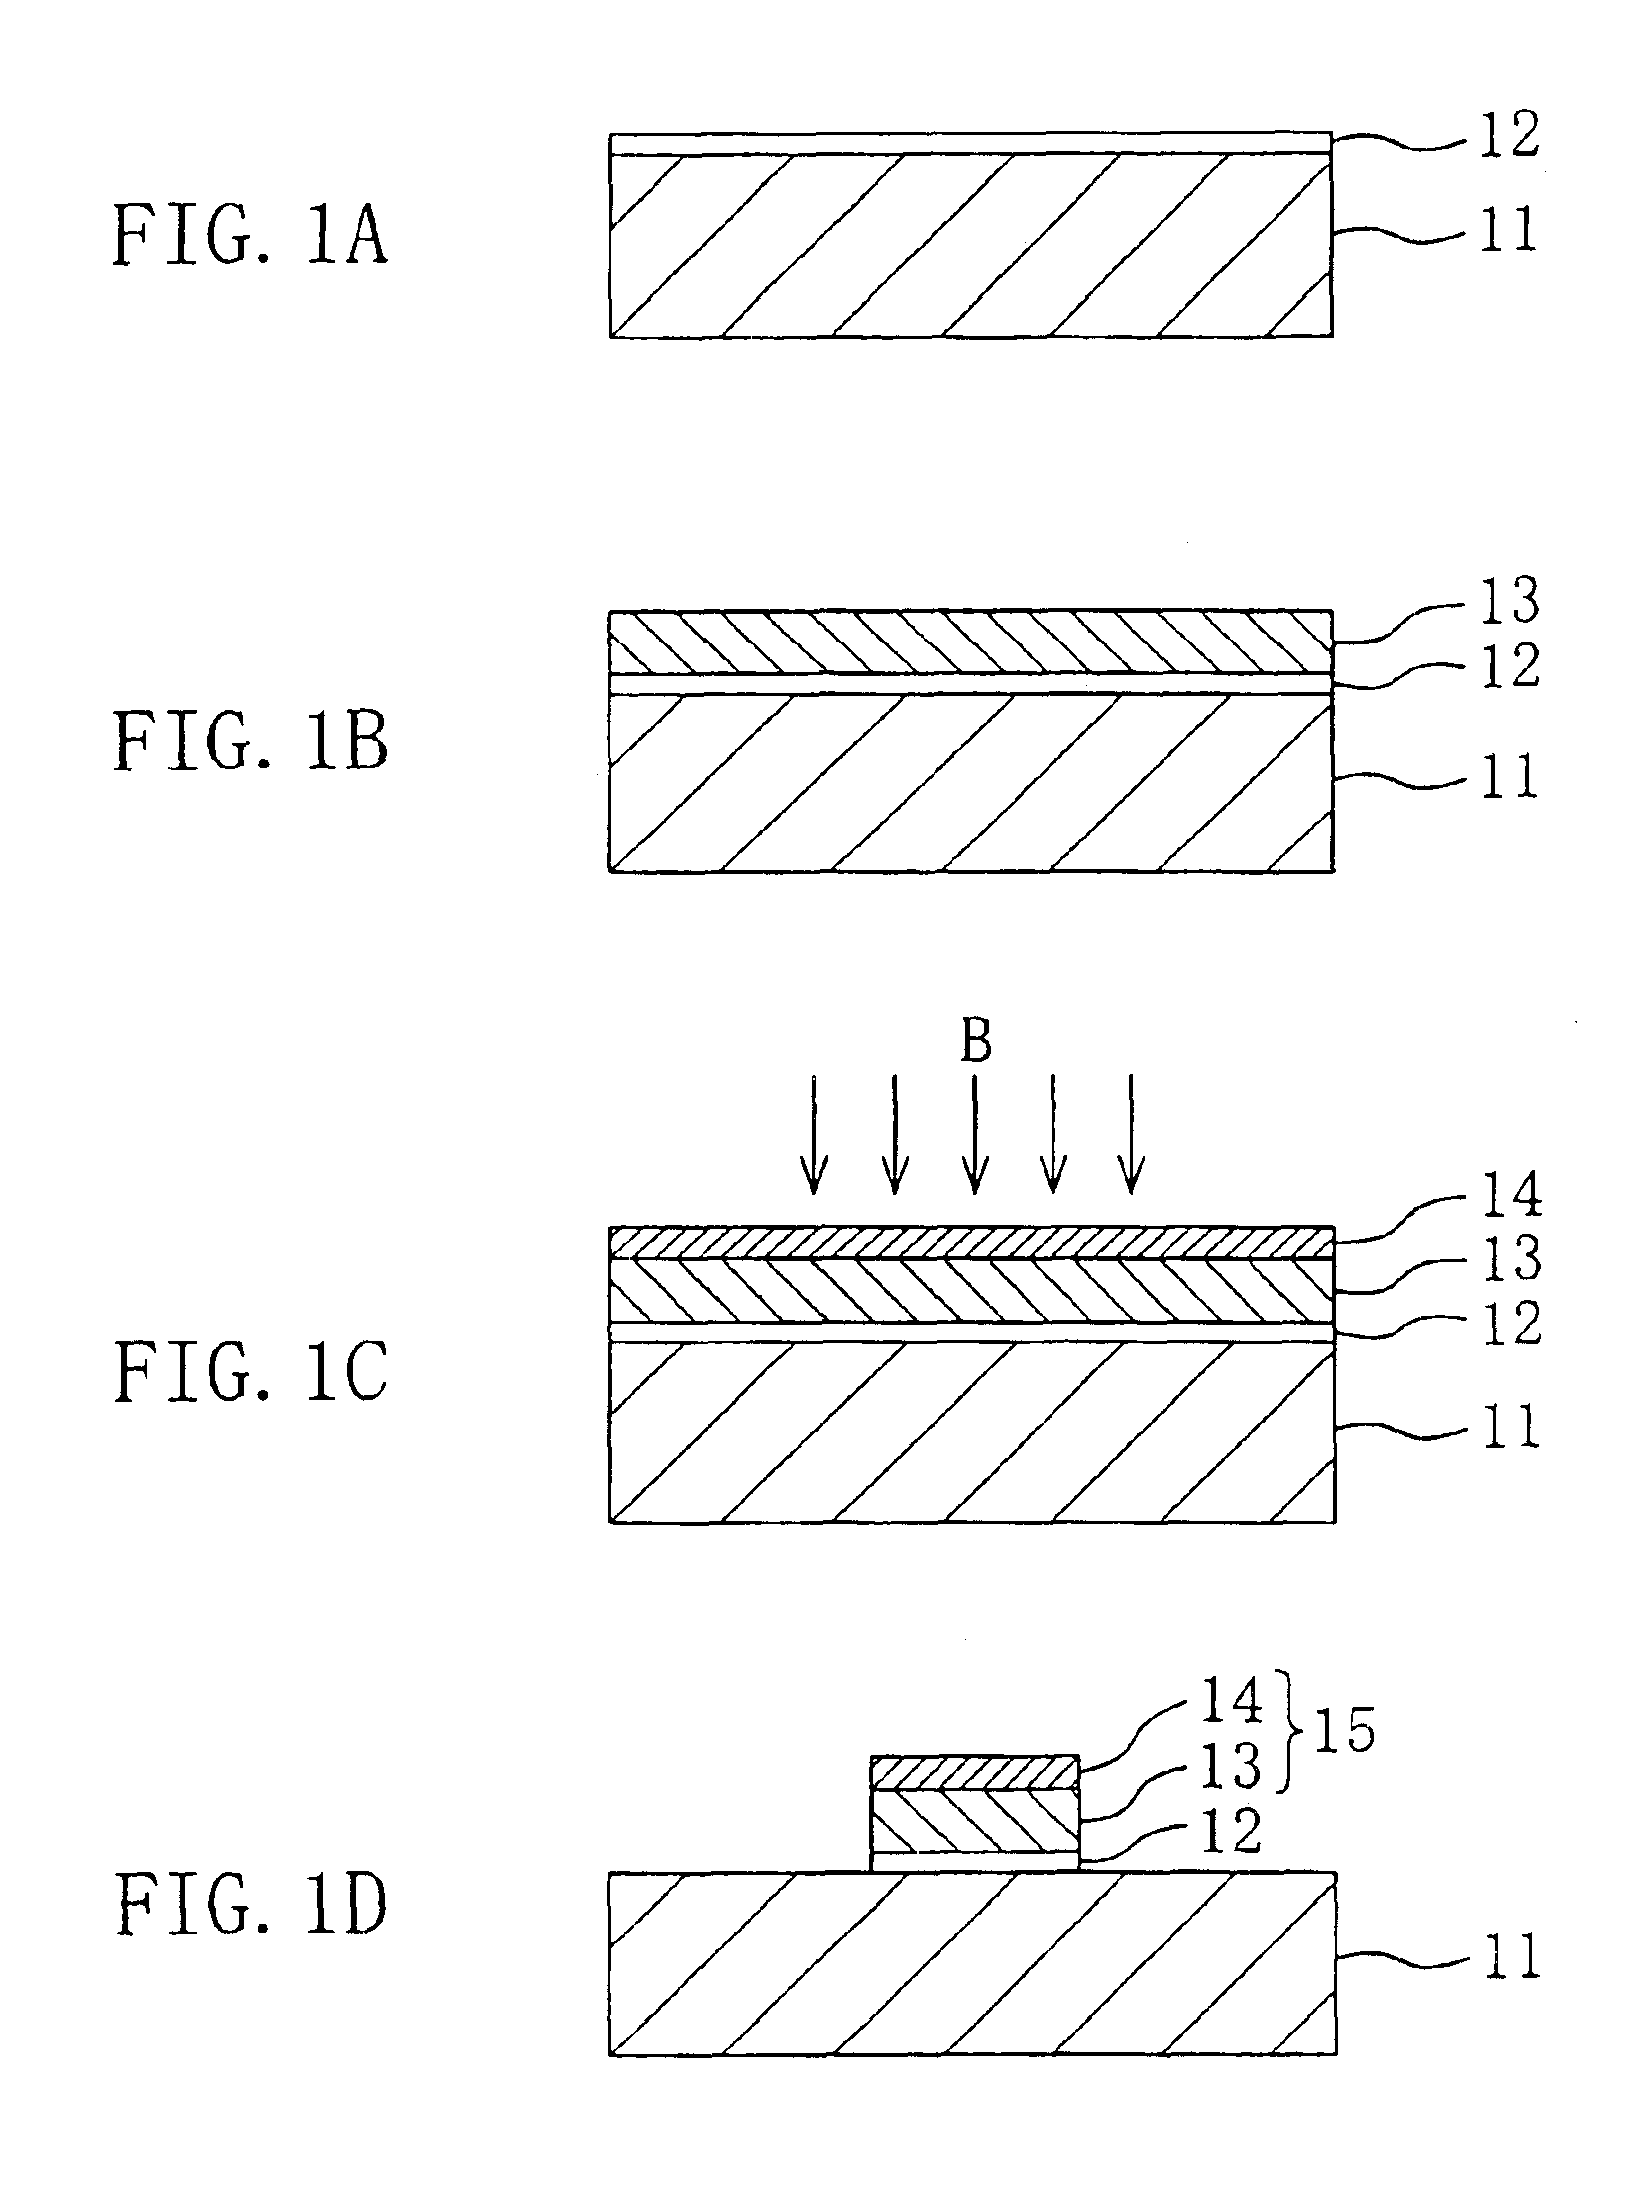 Semiconductor device having an amorphous silicon-germanium gate electrode